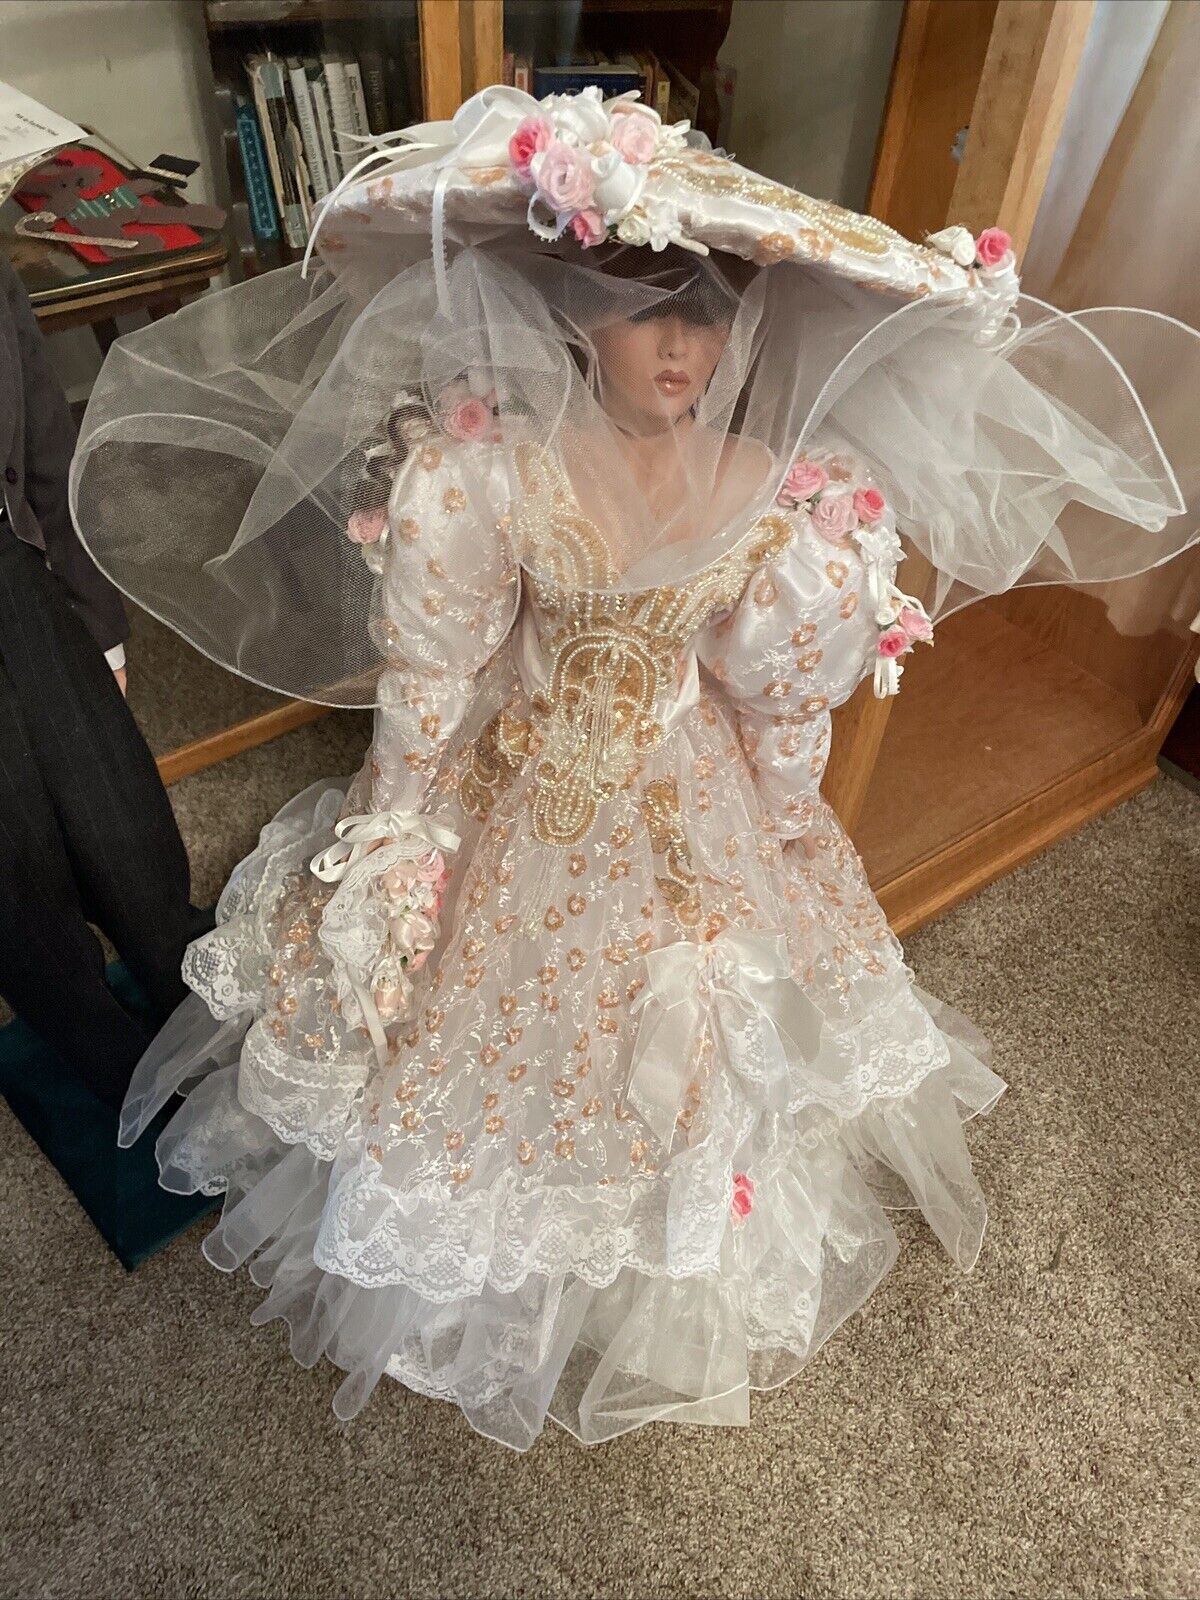 Beautiful 36” Doll Comes With Beautiful Dress And Hat